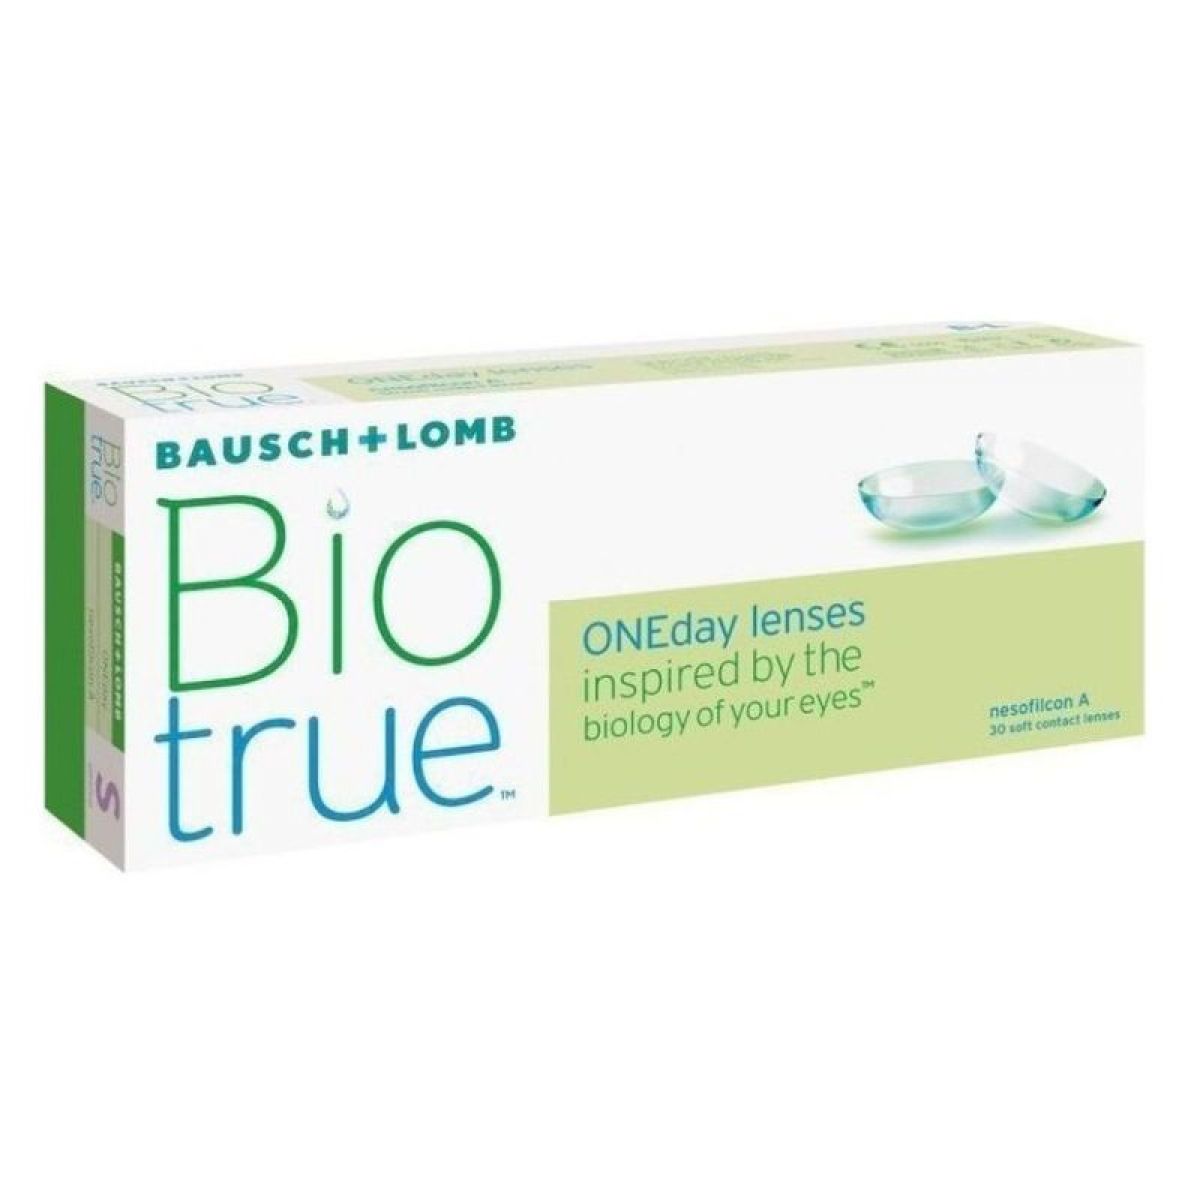 BIOTRUE ONEDAY DAILY DISPOSABLE CONTACT LENSES (30 LENSES)